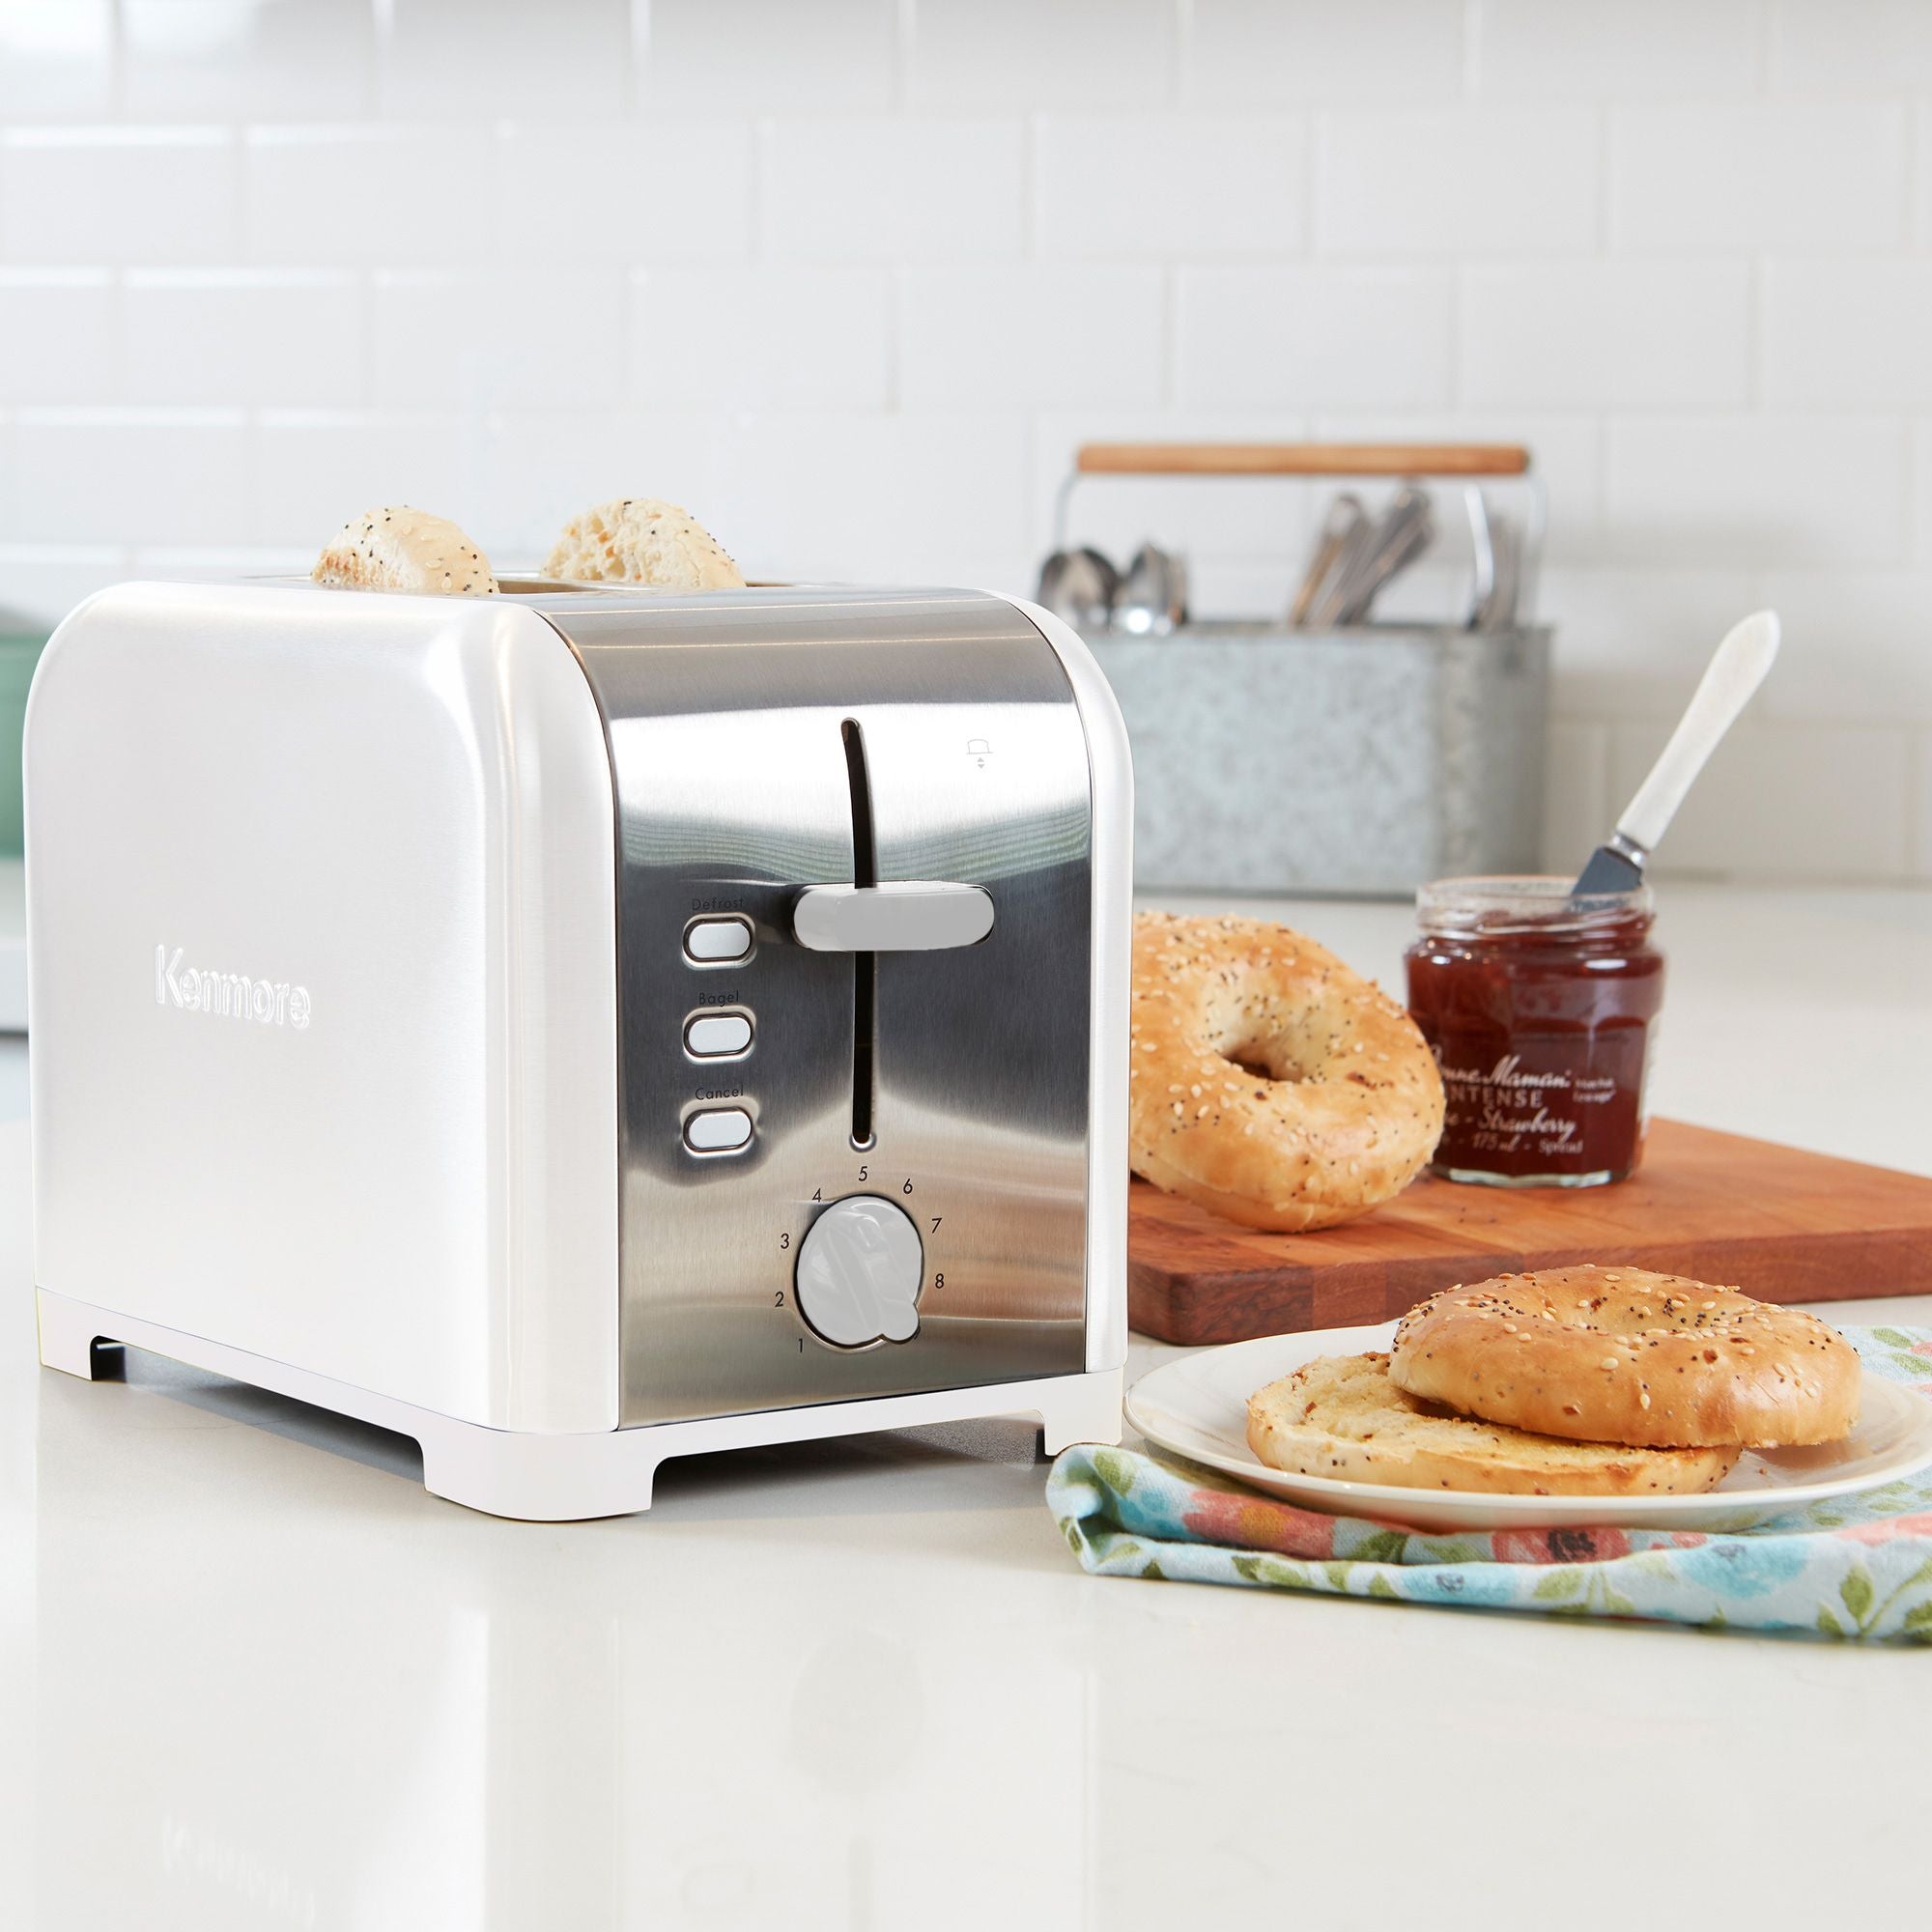 Kenmore 2-slice stainless steel toaster with toasted bagel slices inside on a light gray countertop with white tile backsplash behind. To the right of the toaster is a napkin and plate with toasted bagel and a wooden cutting board with uncut bagels and an open jam jar